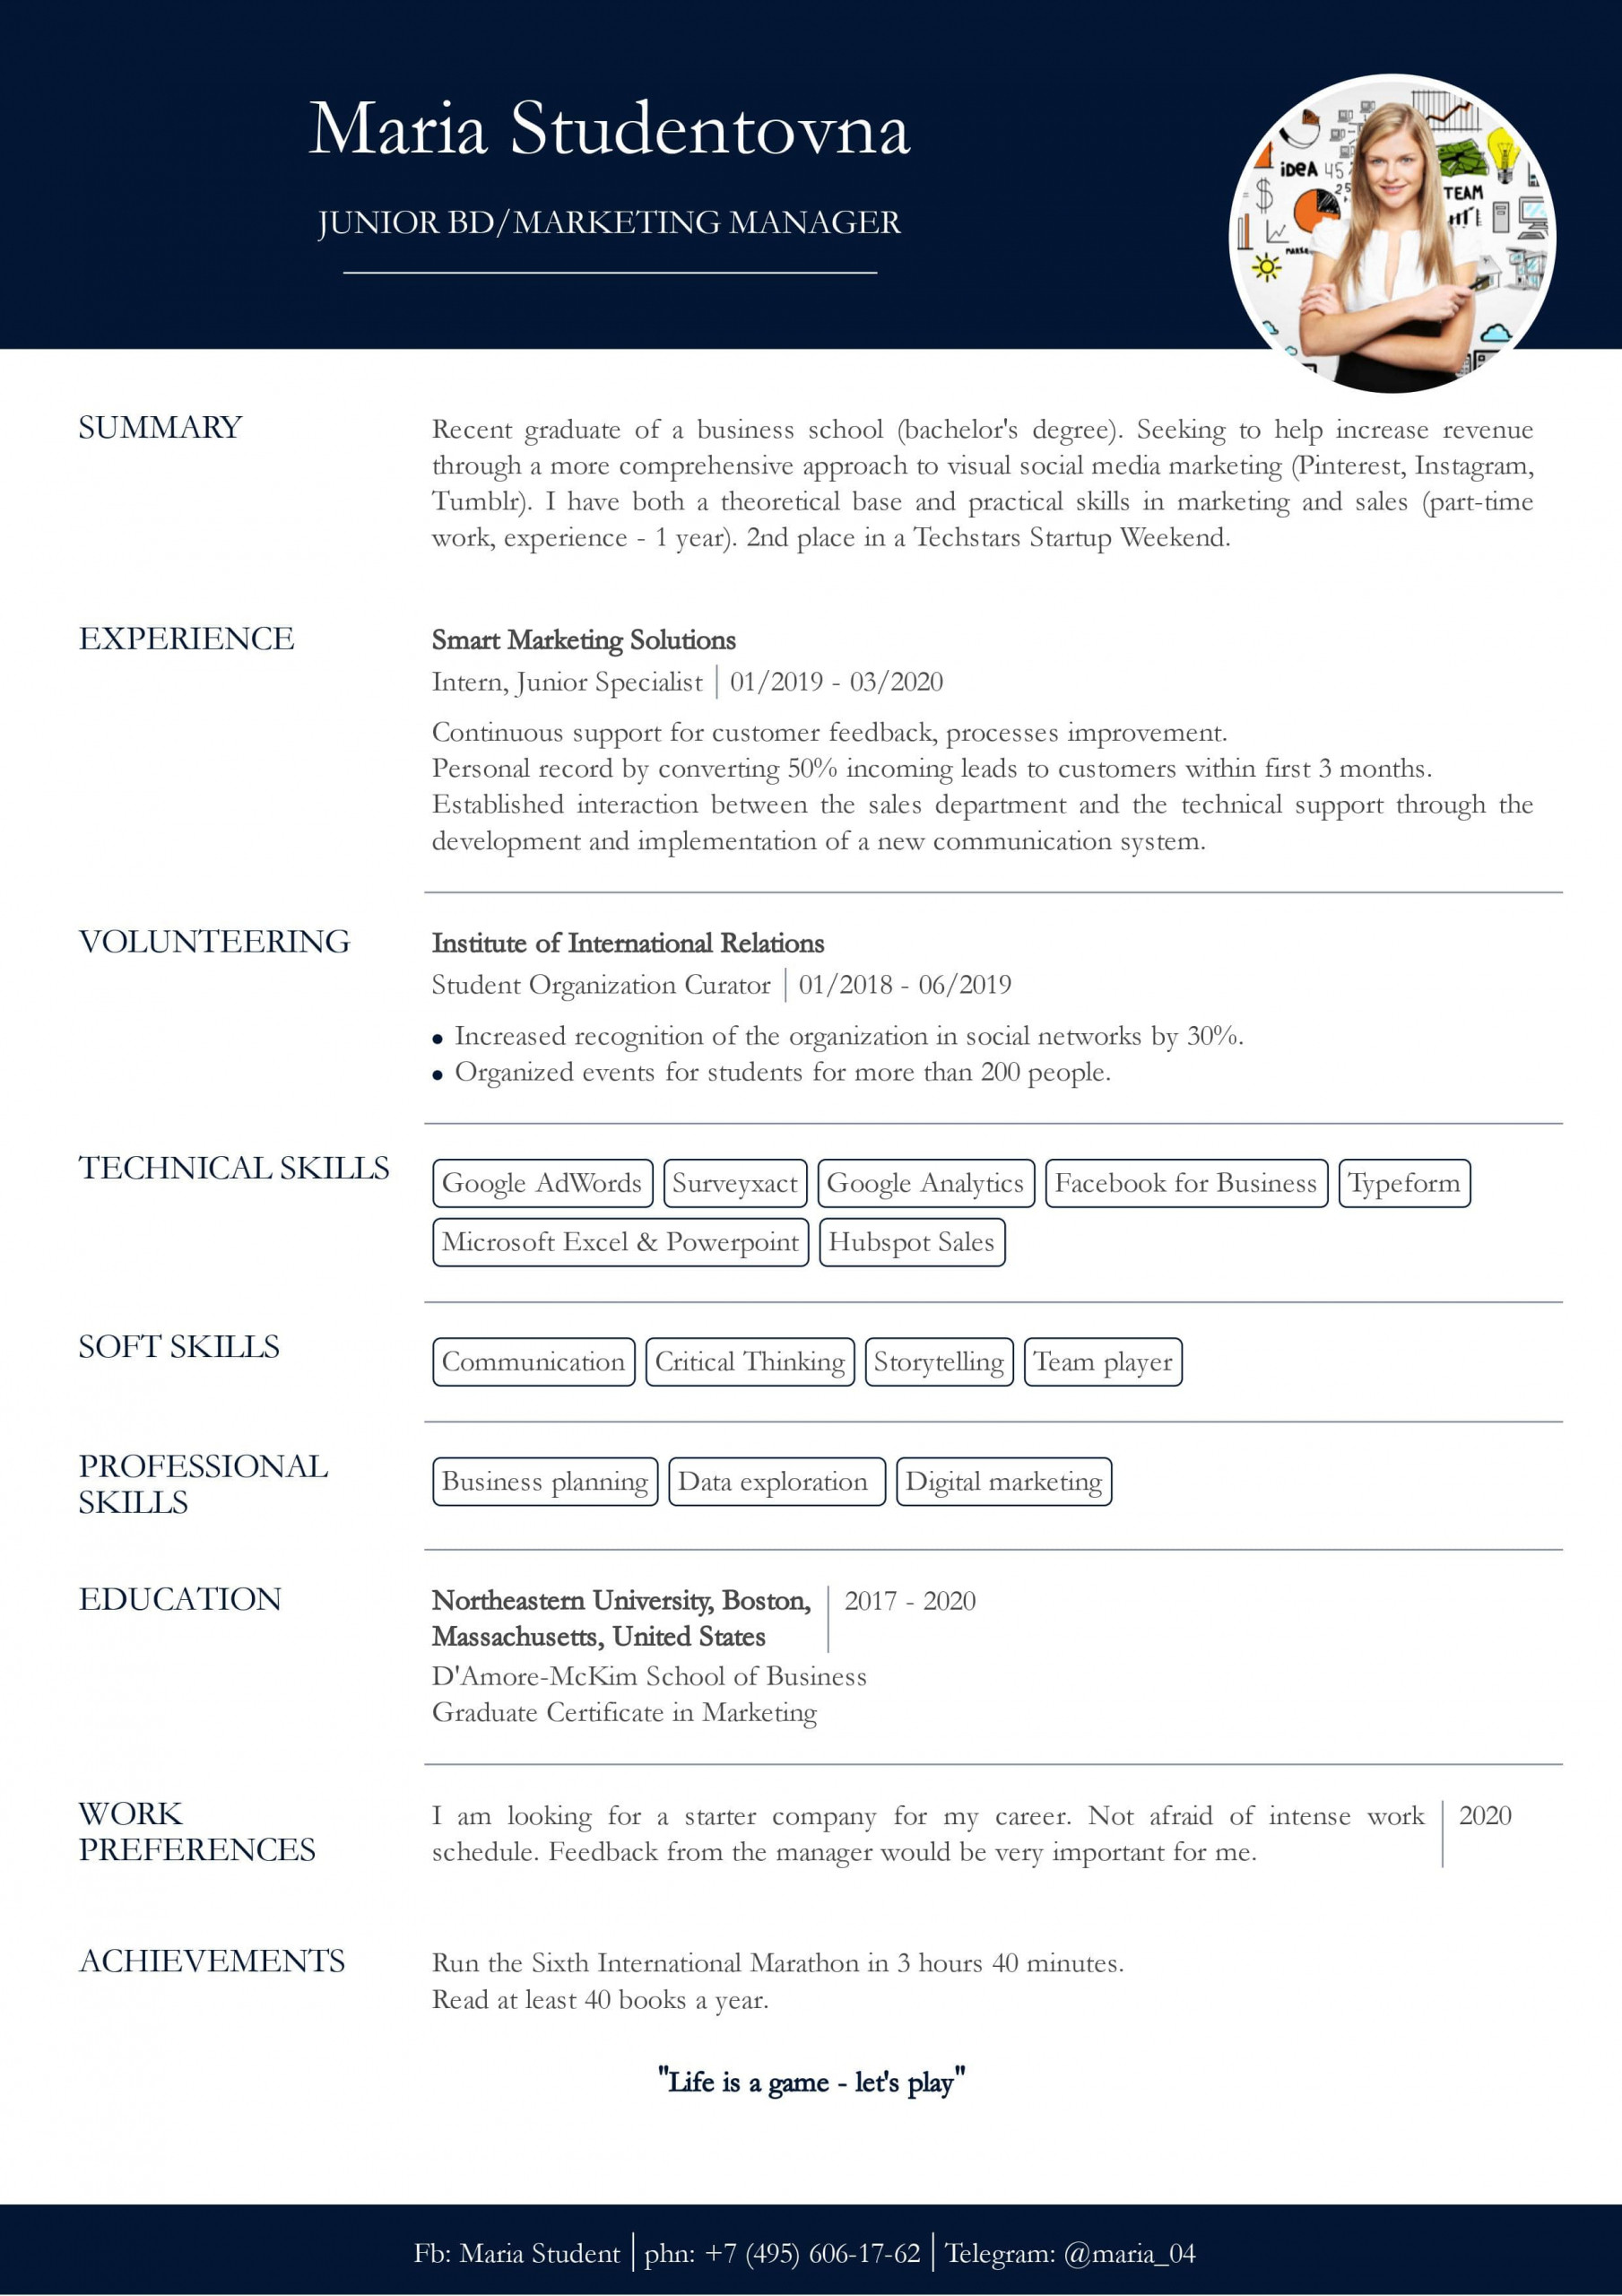 Basic Resume Template No Work Experience Resume with No Work Experience. Sample for Students. – Cv2you Blog